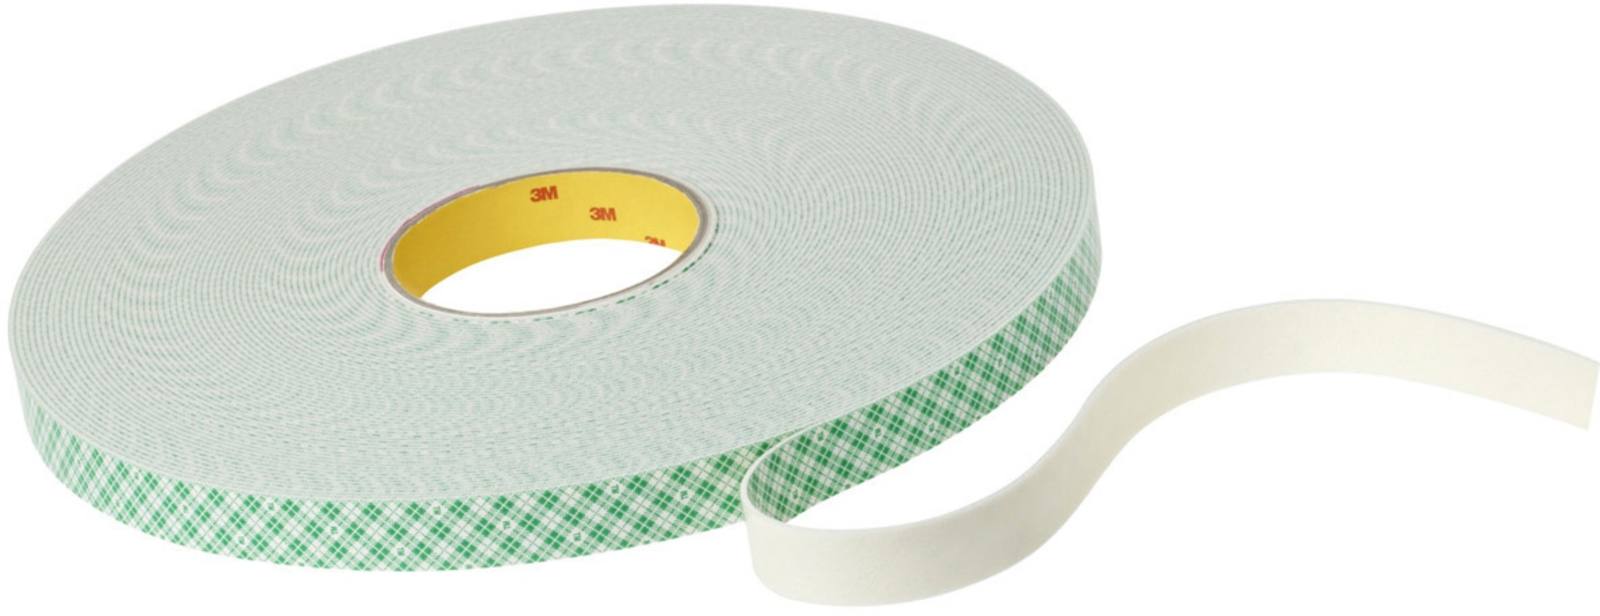 3M PU foam adhesive tape with acrylic adhesive 4026, beige, 9 mm x 33 m, 1.6 mm